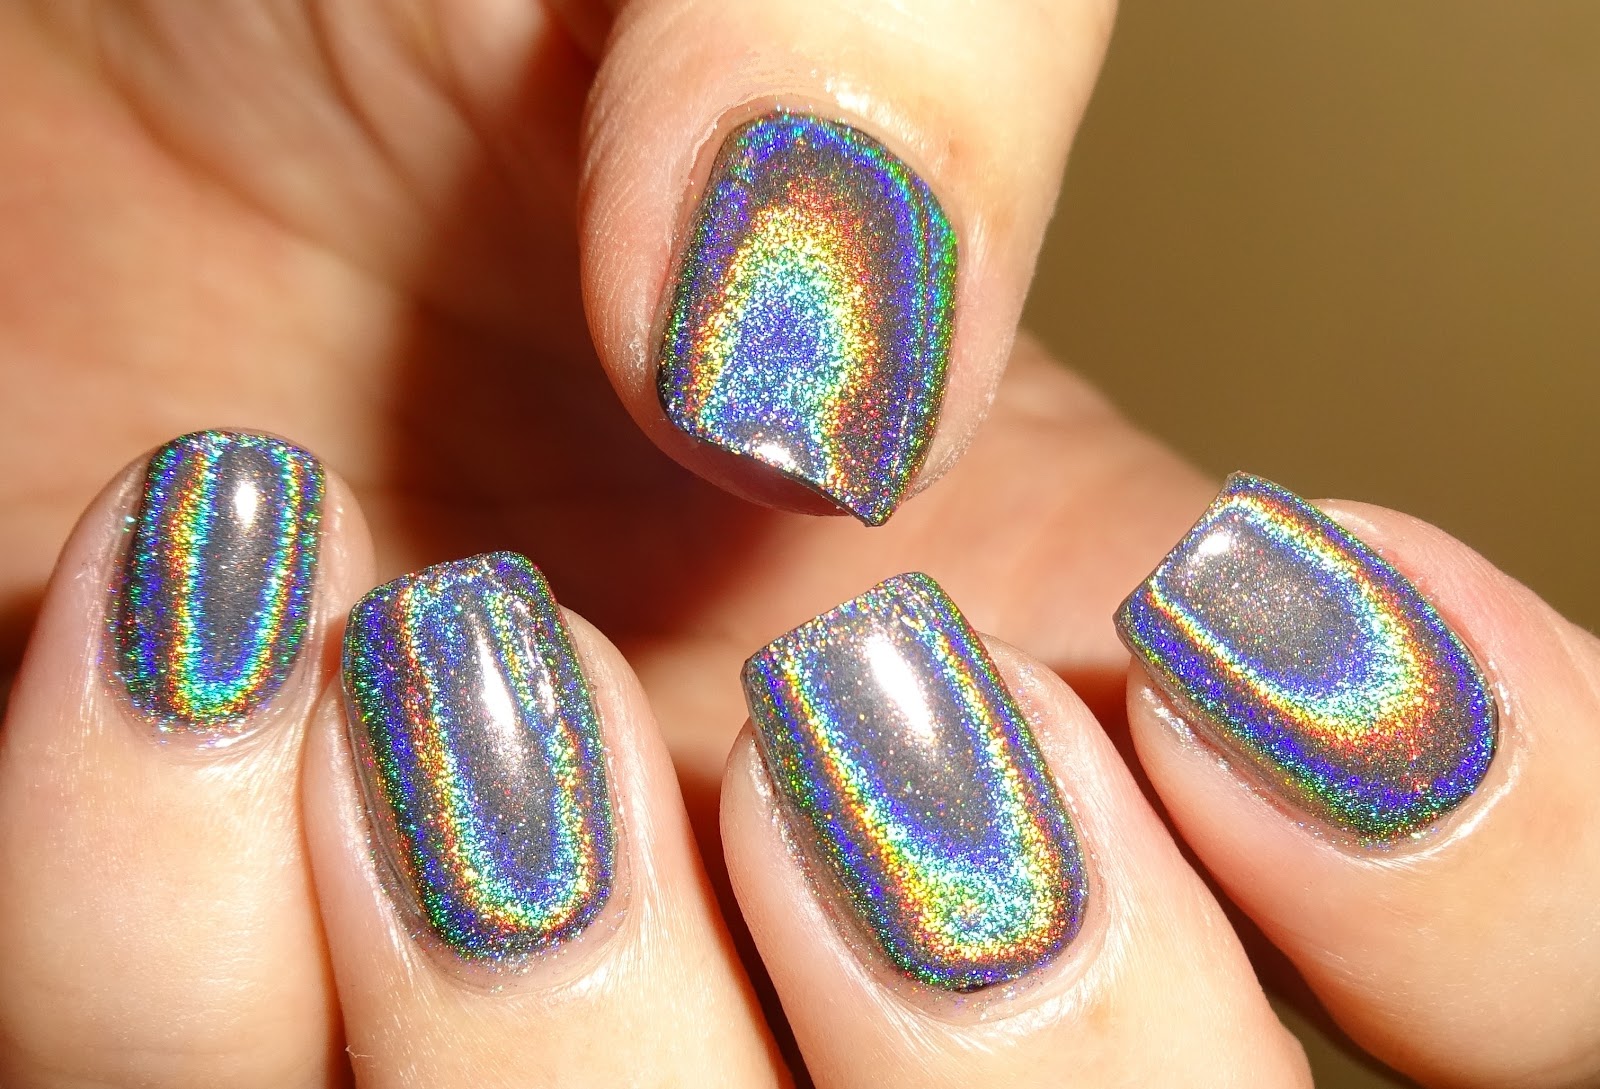 2. How to Achieve Stunning Holographic Nails - wide 5